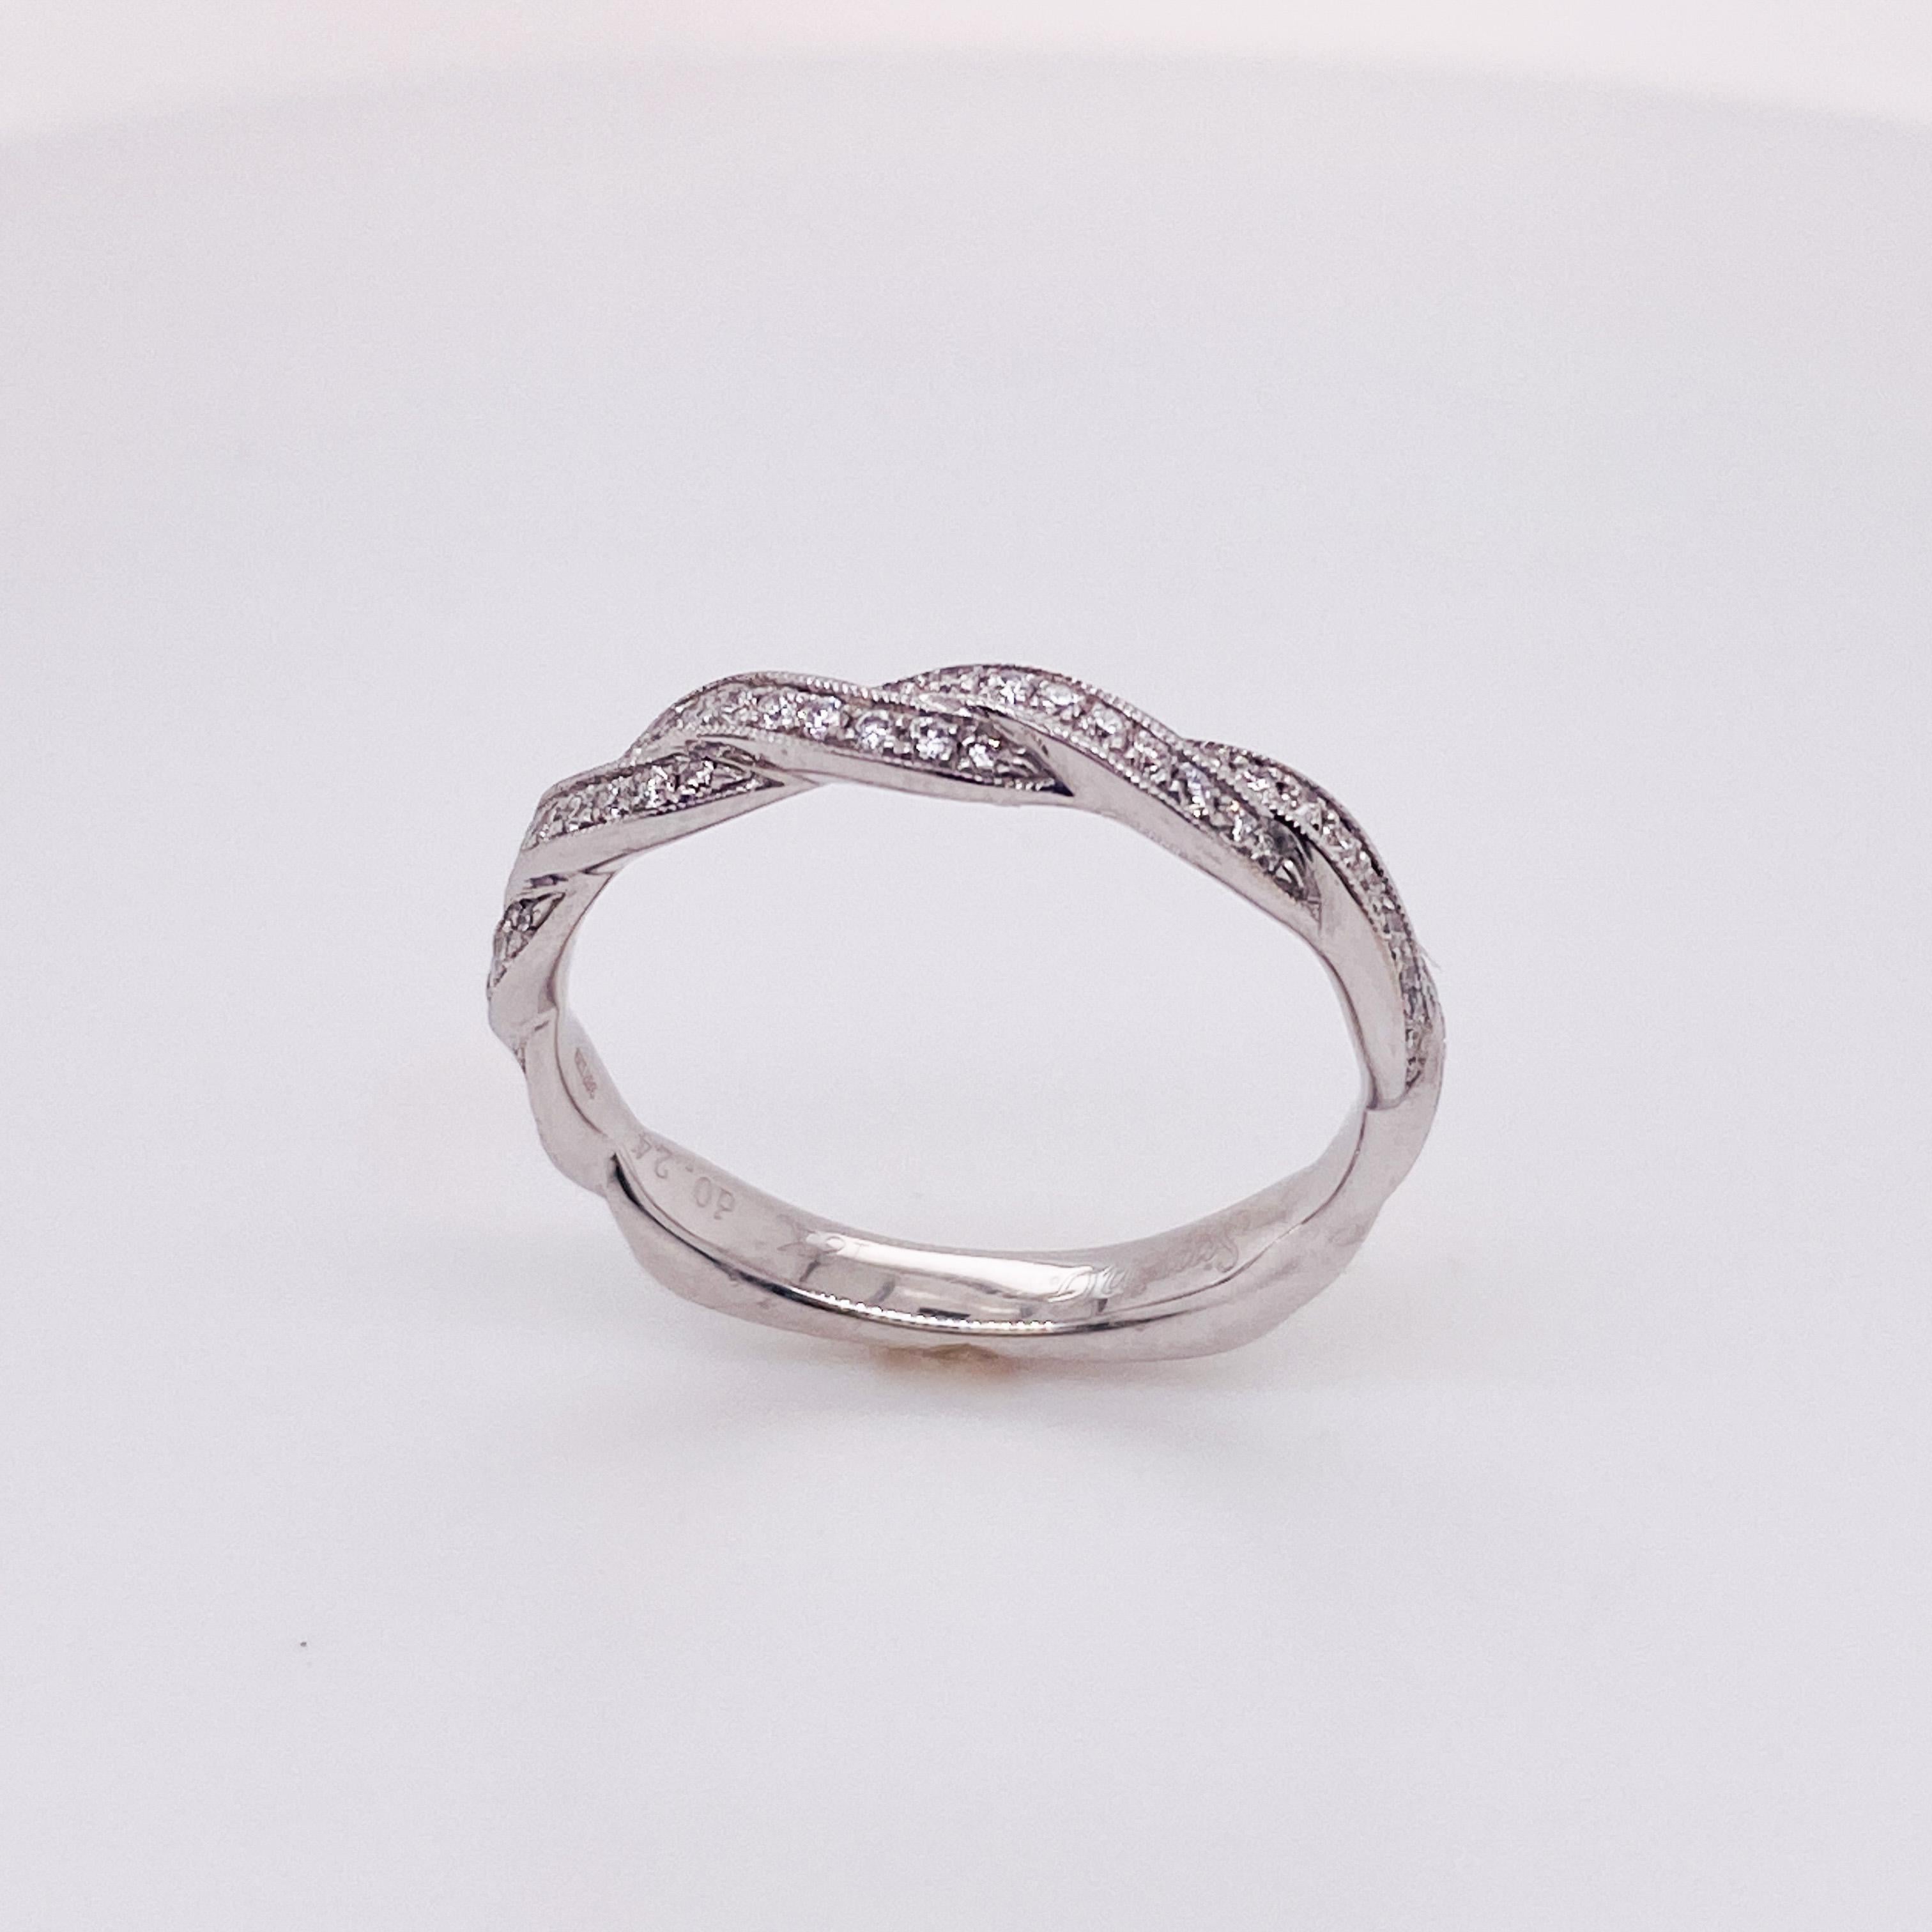 Ribbons of diamonds twine across the top of your finger in this gorgeous 18 karat white gold ring. The bottom of the ring has squared Euroshank corners to keep it from spinning on your finger. Stack this band with any of your favorite rings.  
The